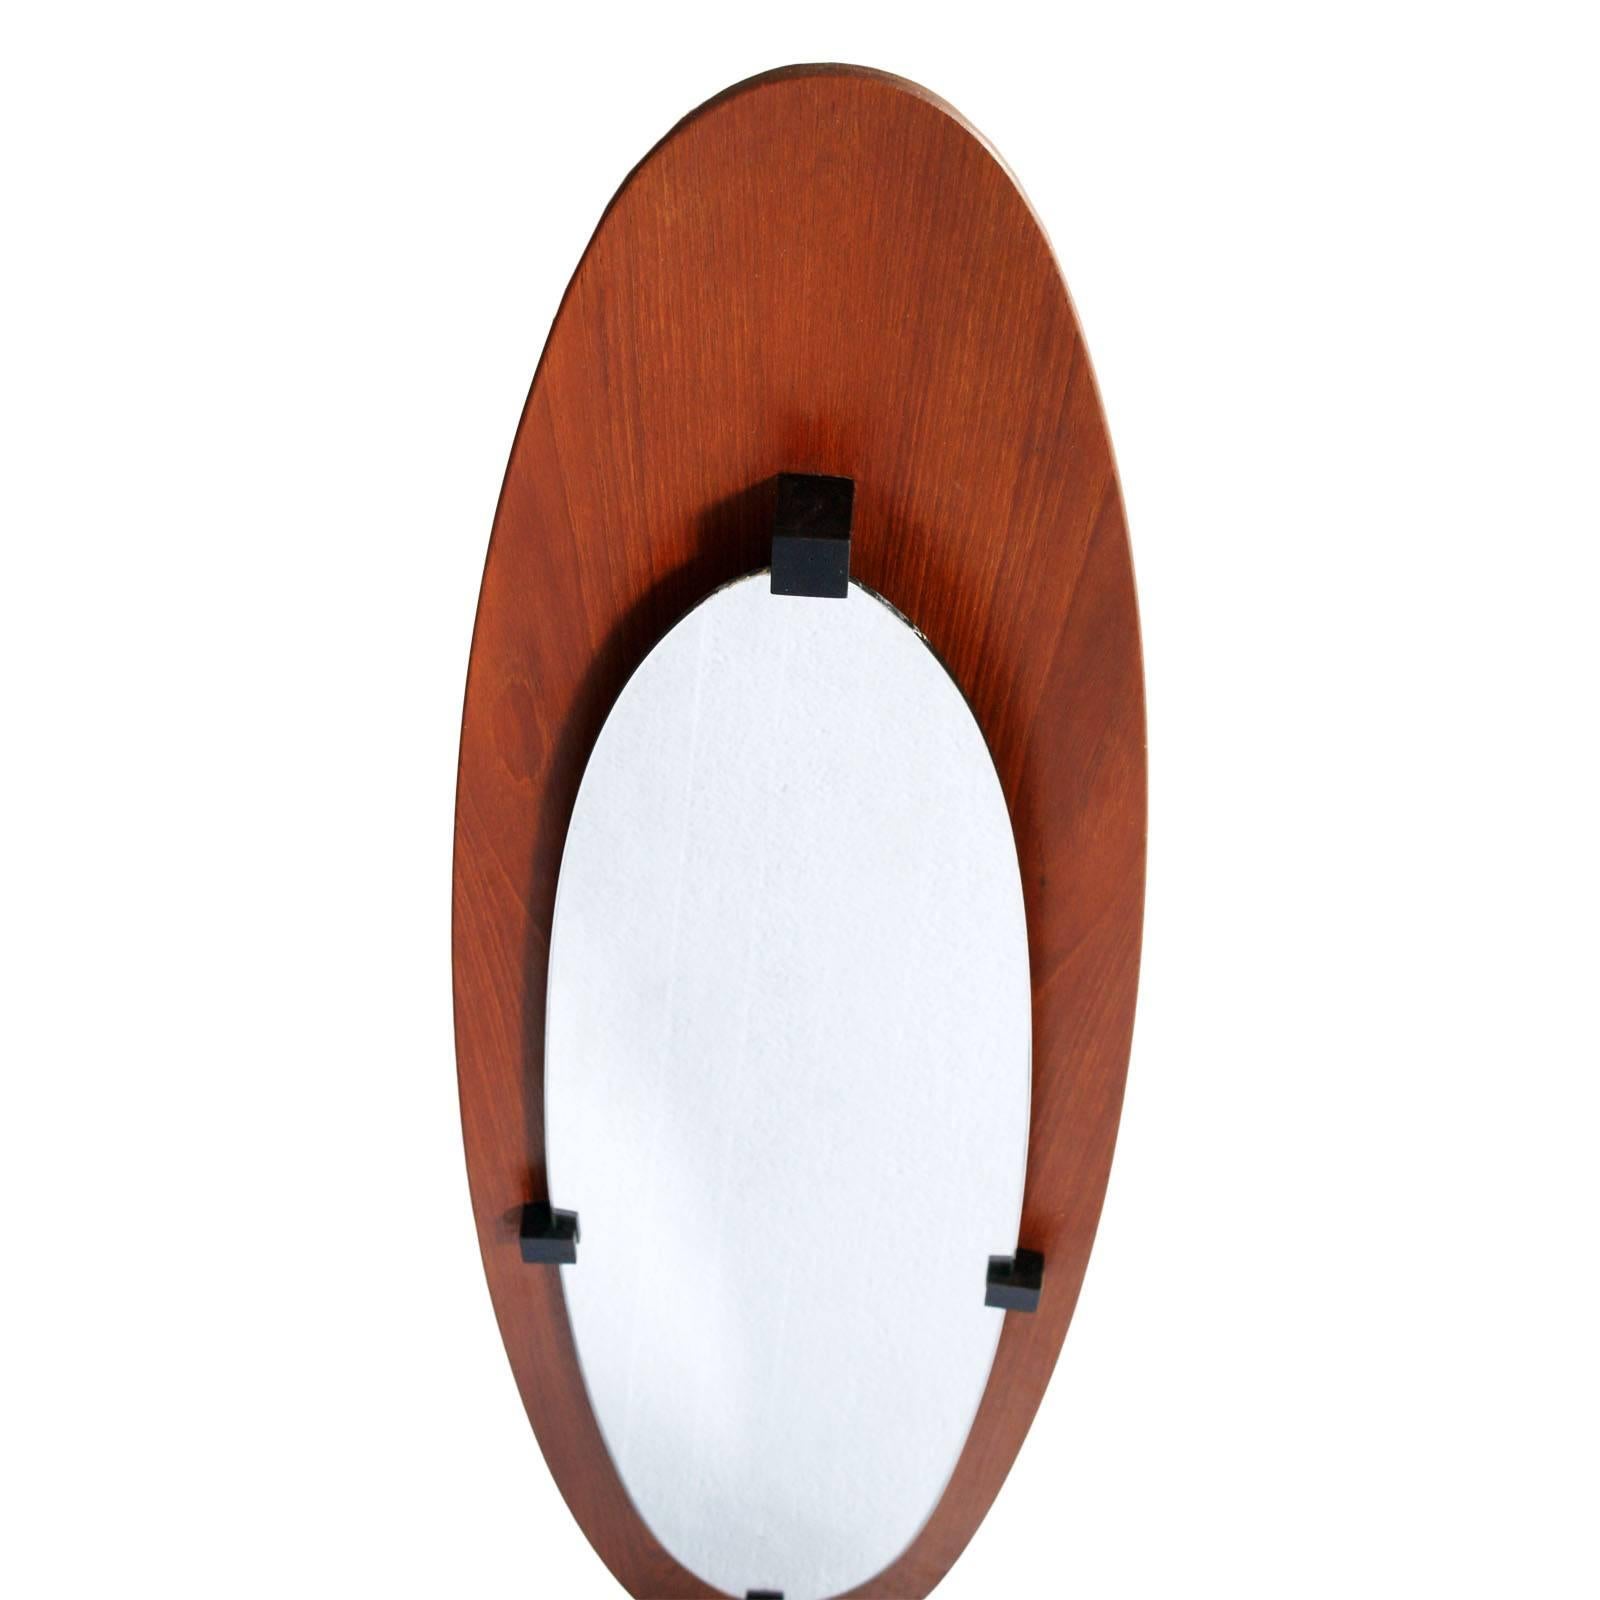 1960s Italian Wall Mirror, Bentwood Teack, Franco Campo & Carlo Graffi for Home For Sale 2